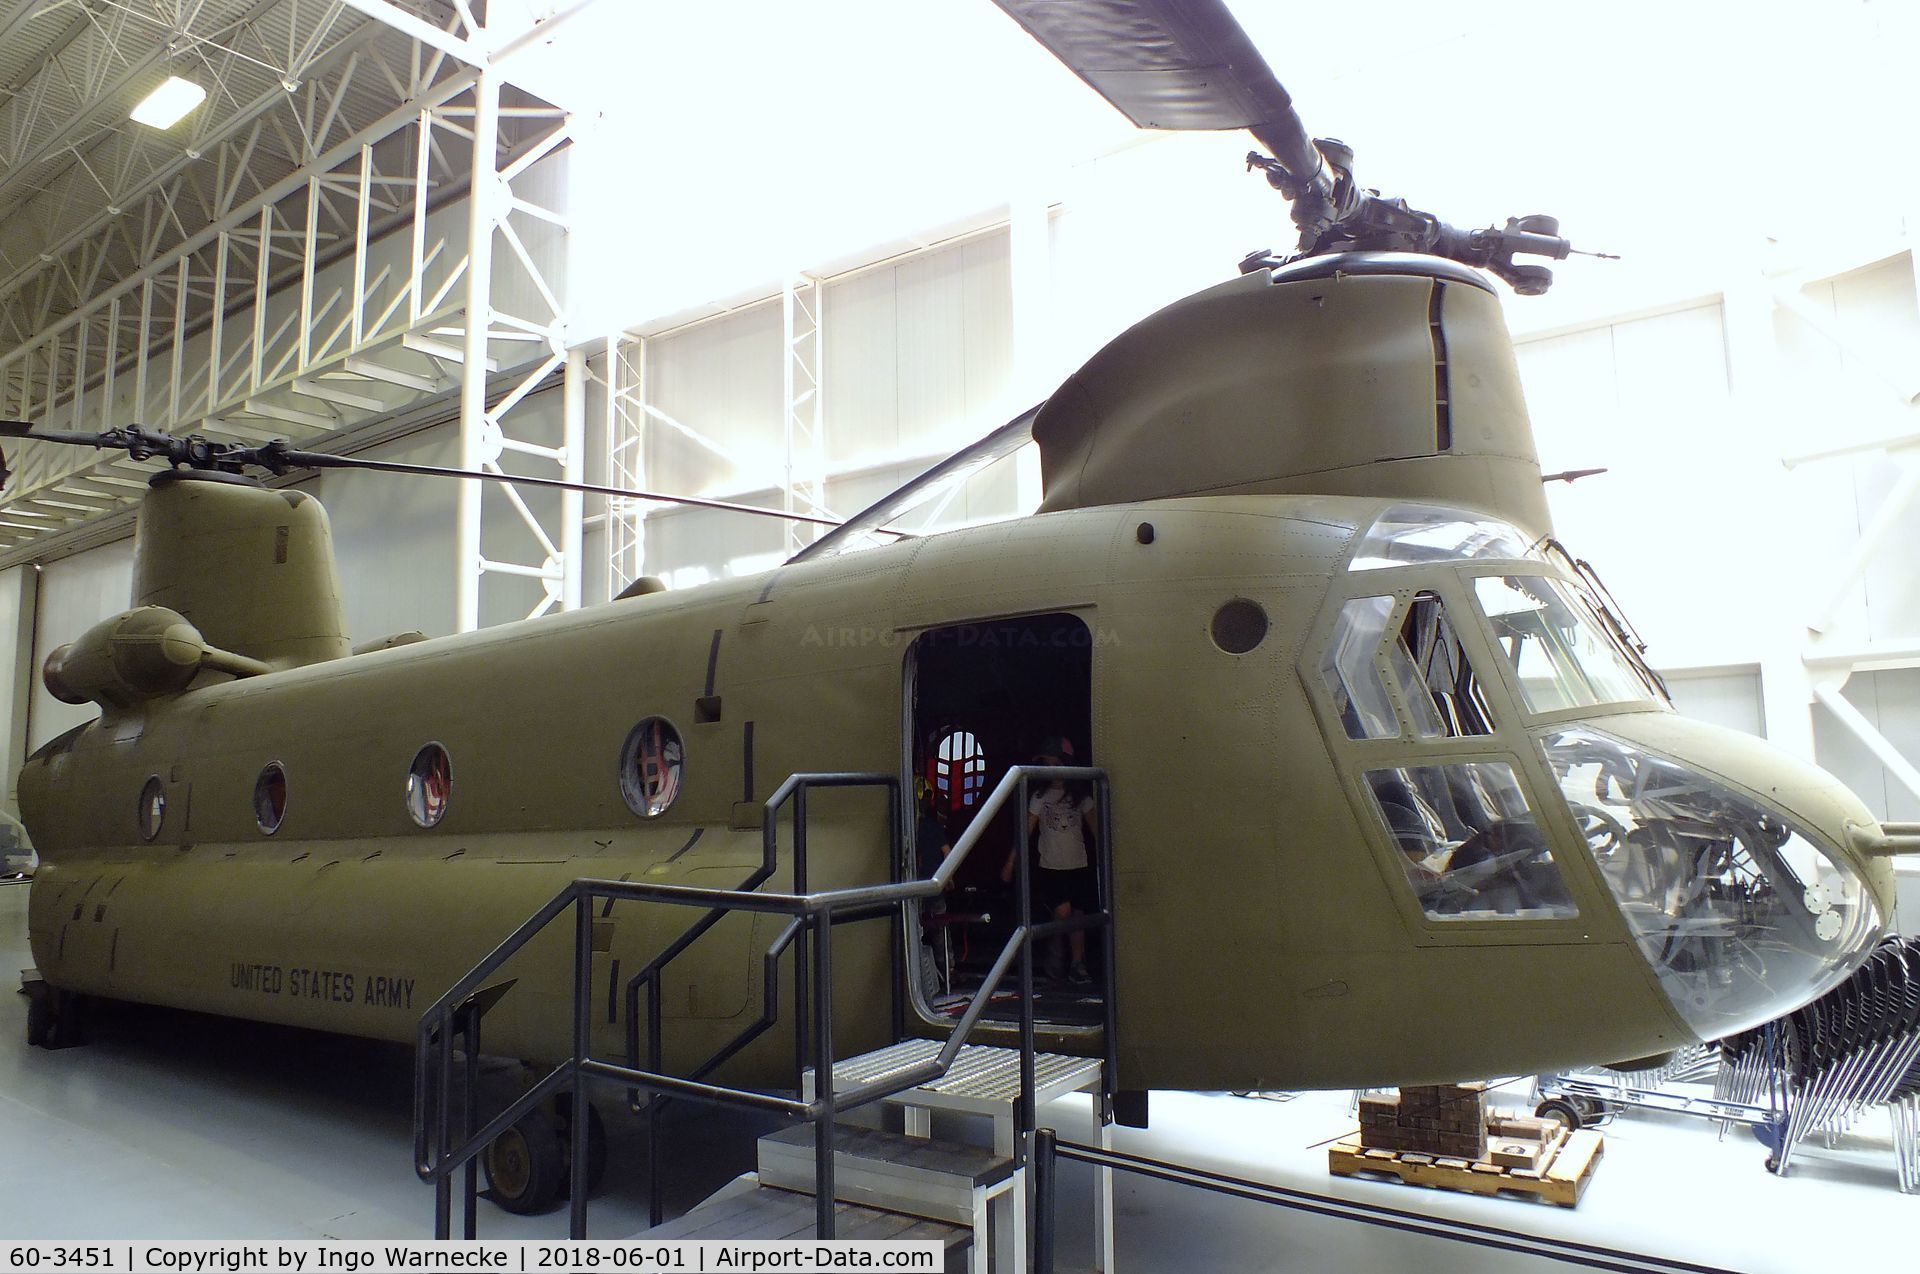 60-3451, 1961 Boeing Vertol CH-47A Chinook C/N B.010, Boeing Vertol CH-47A Chinook at the US Army Aviation Museum, Ft. Rucker